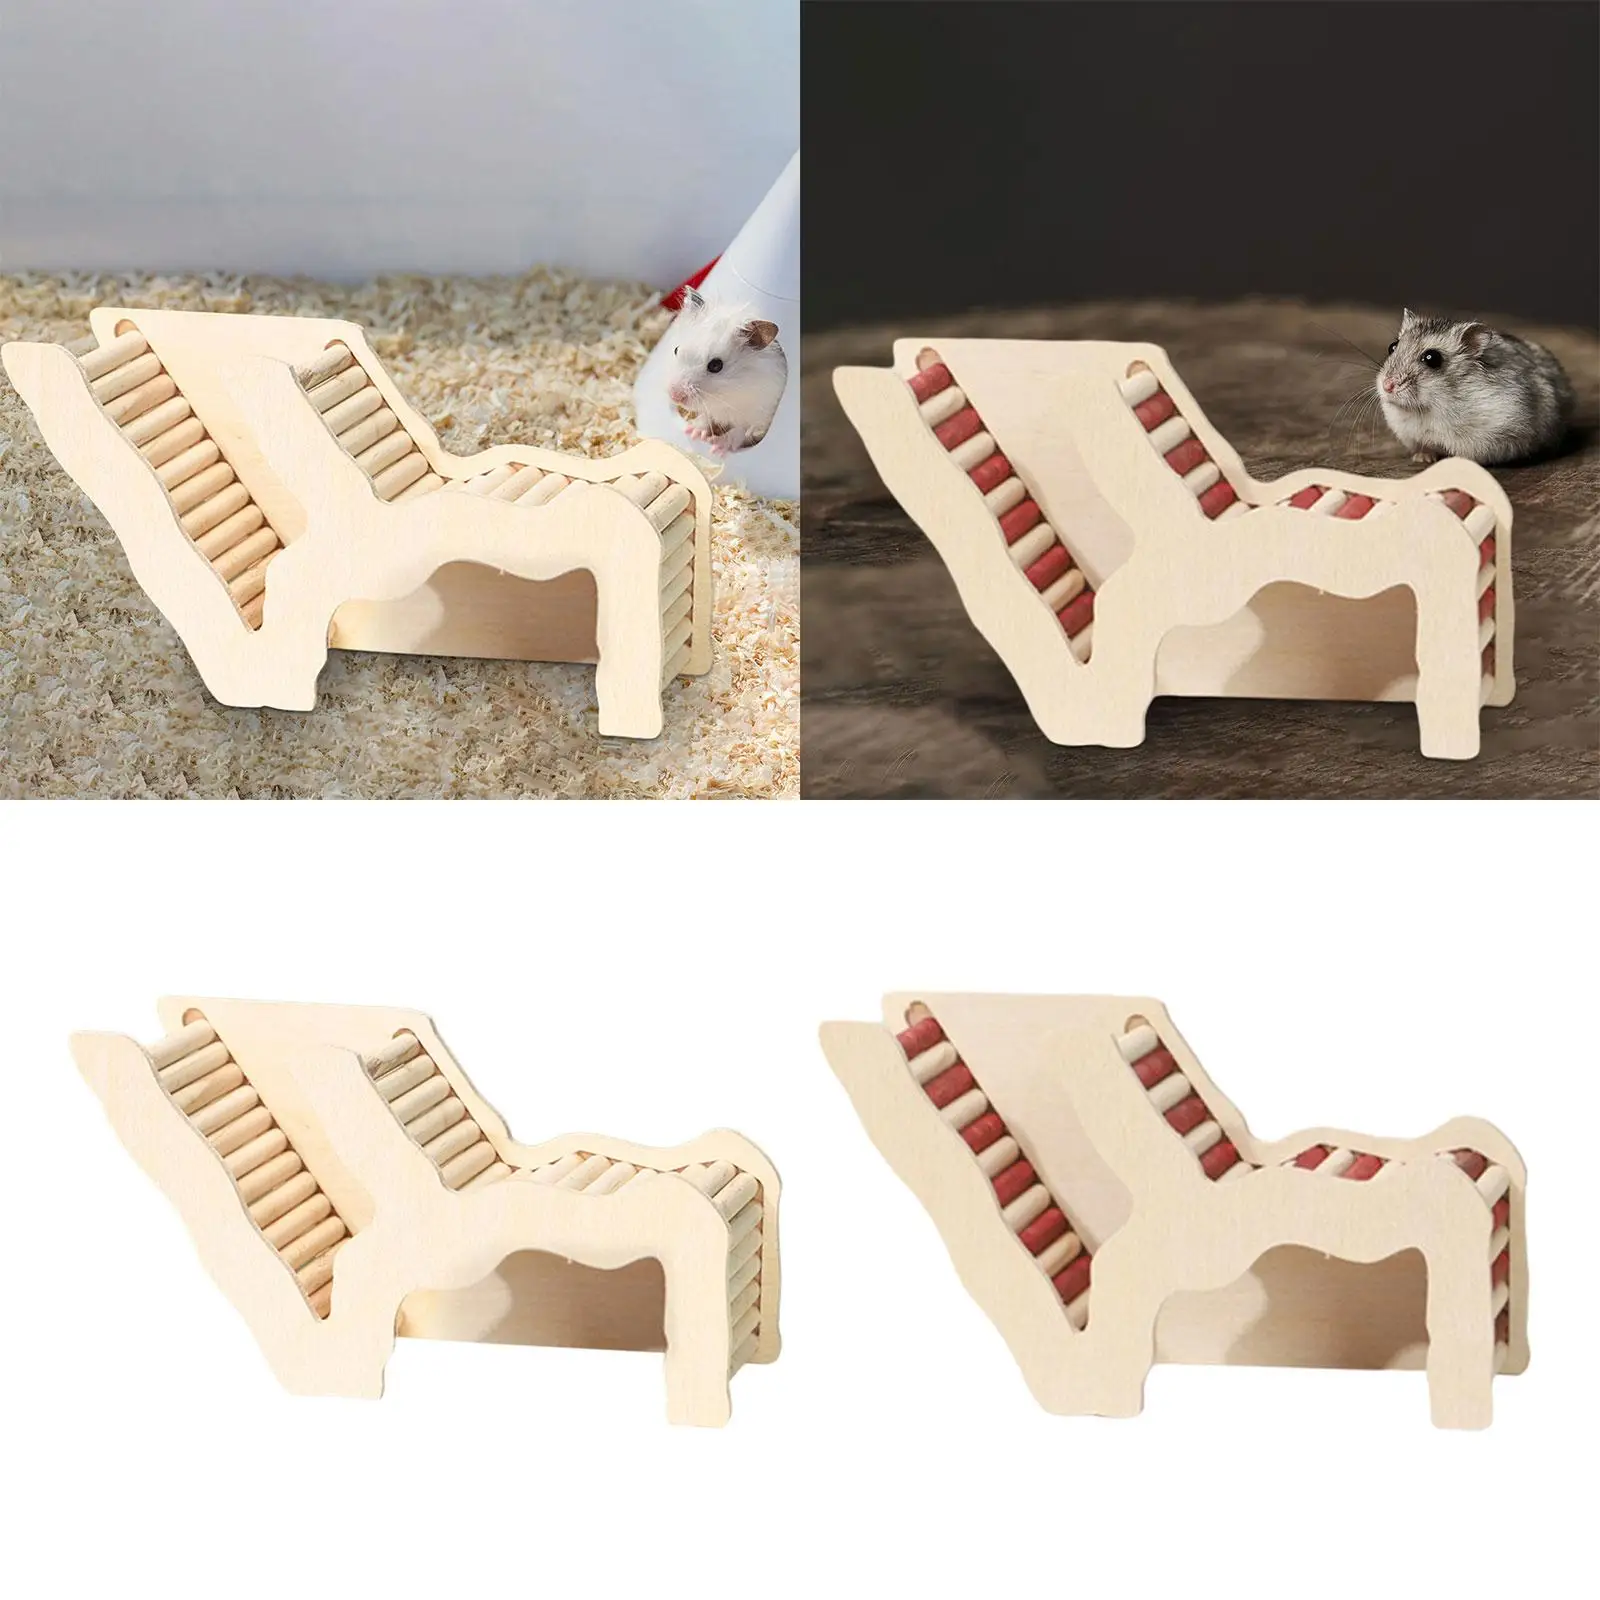 Hamster Hideout Climbing Ladder Tiny Gerbils Small Animals Palyhouse Wood Tunnel Toy Activity Platform Pet Supplies Toys